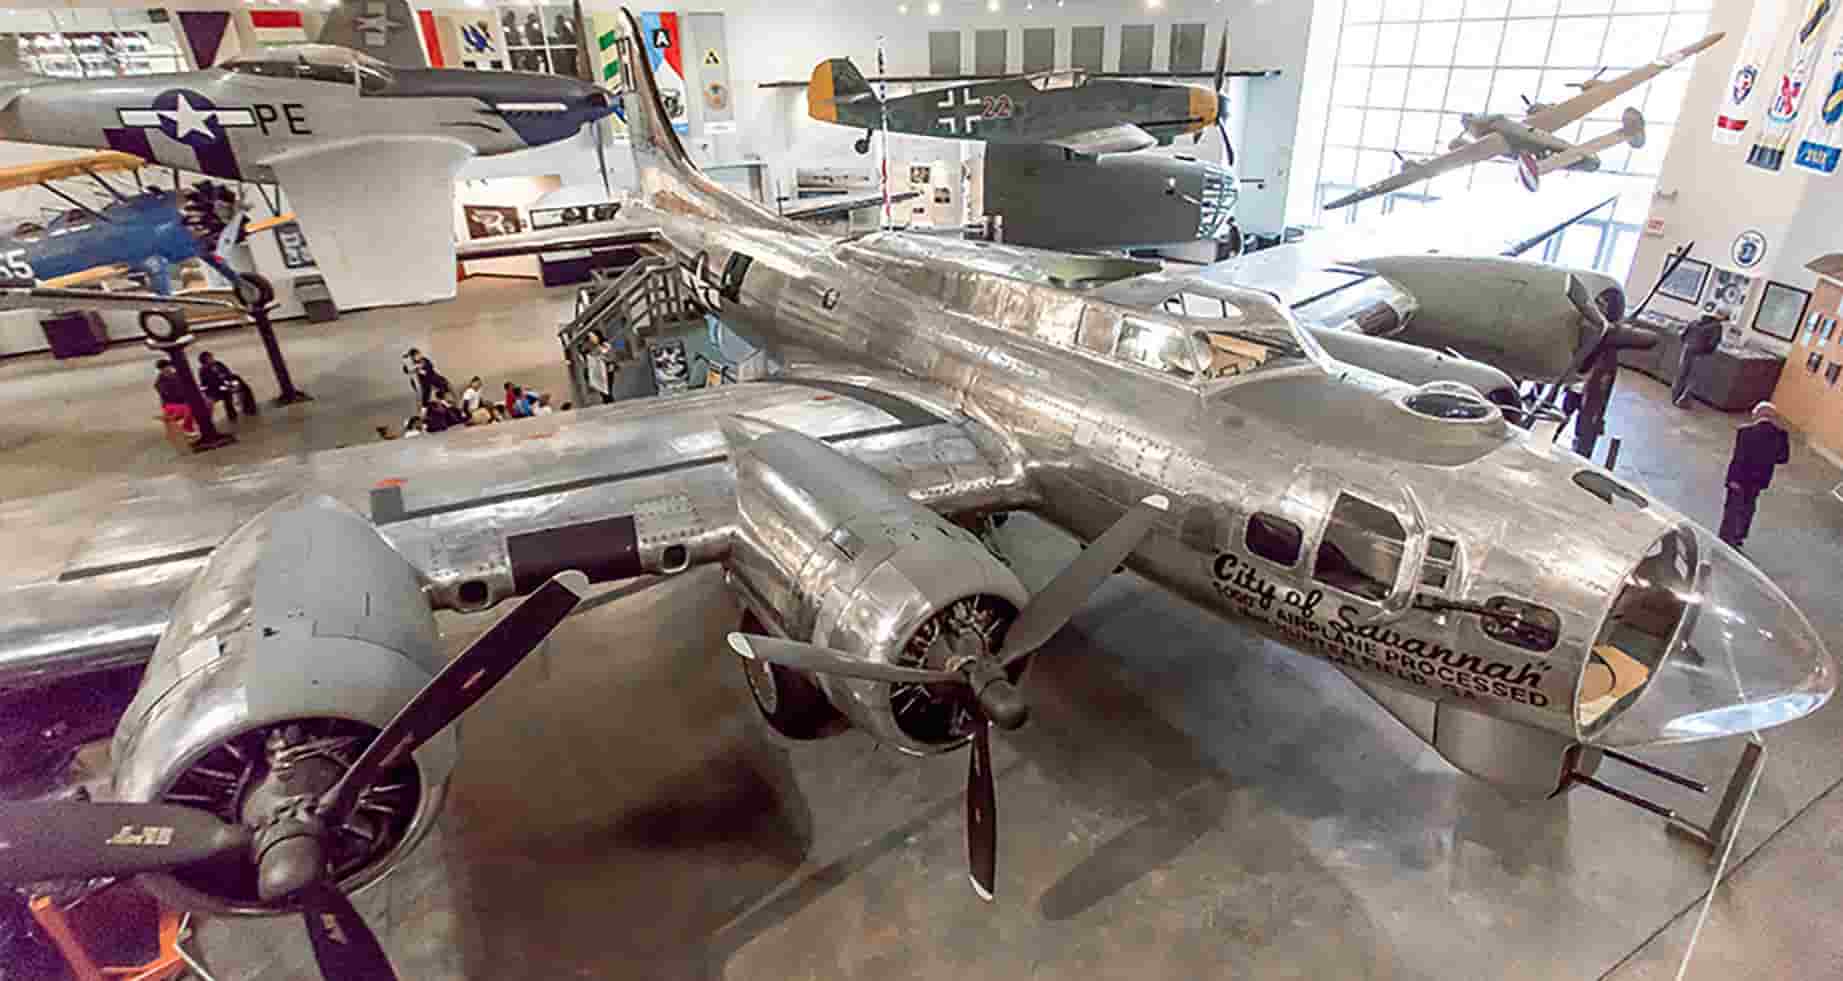 National Museum of Mighty Eighth Air Force